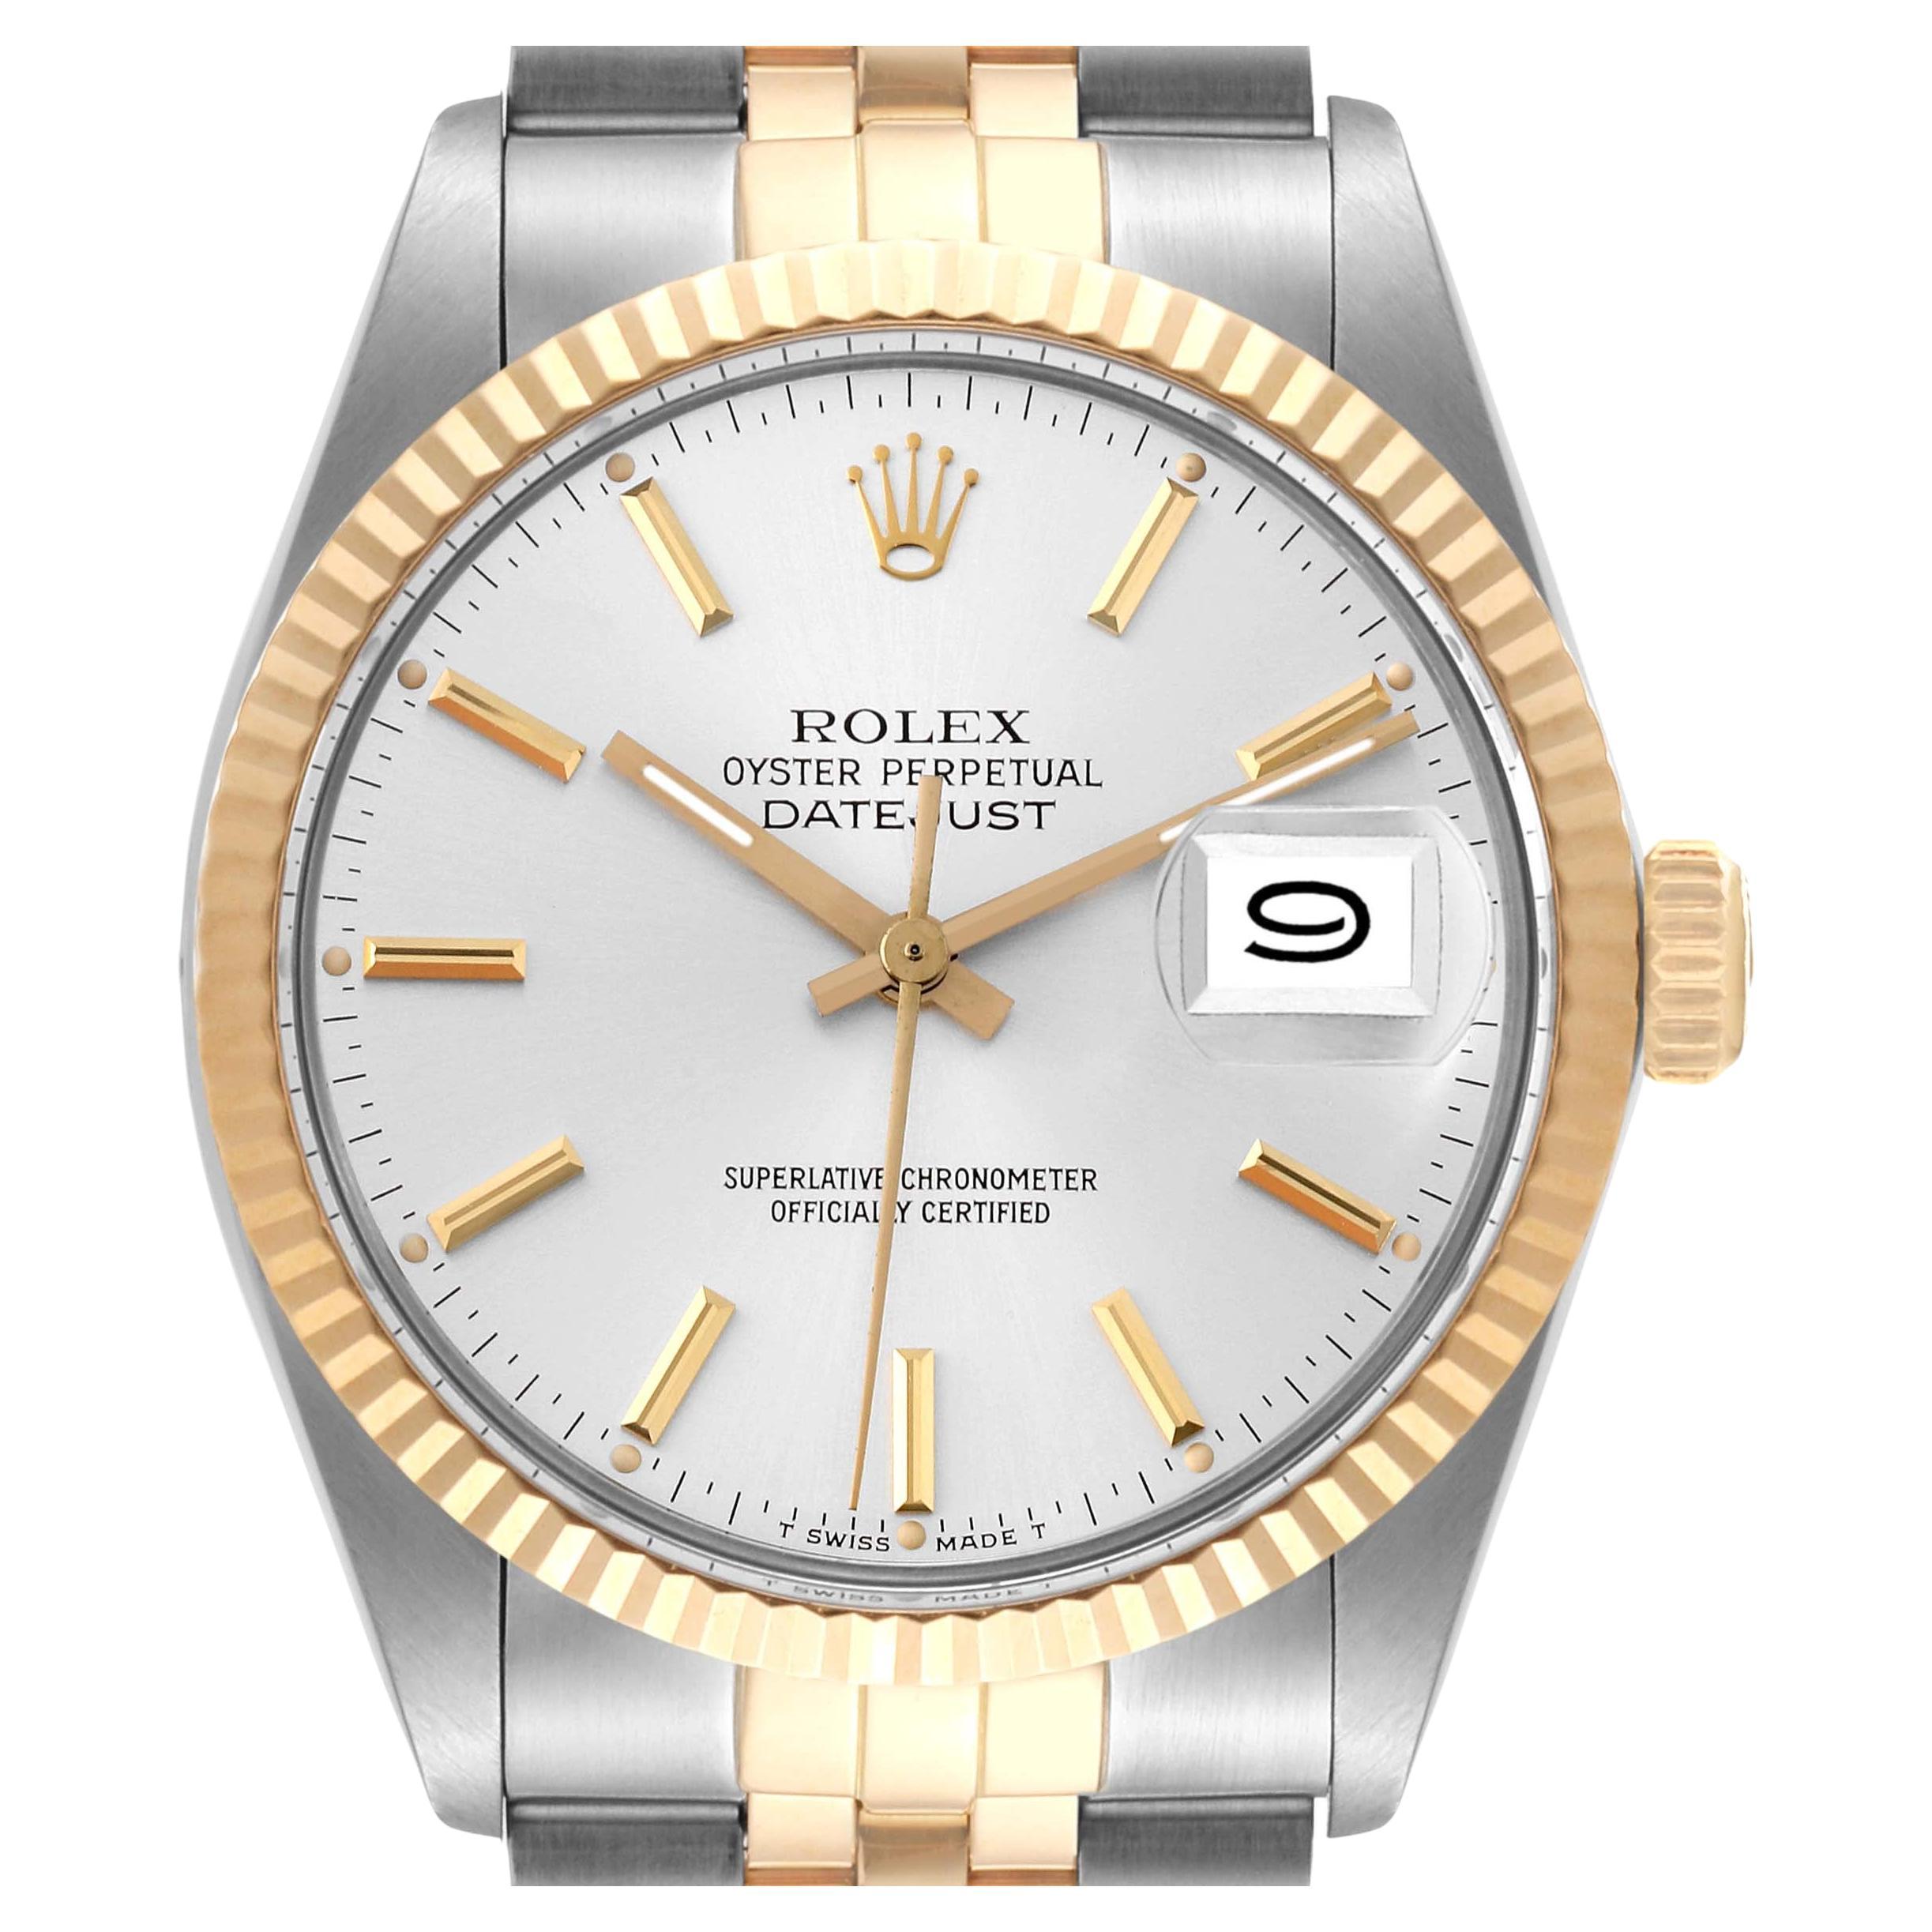 Rolex Datejust Steel Yellow Gold Silver Dial Vintage Mens Watch 16013